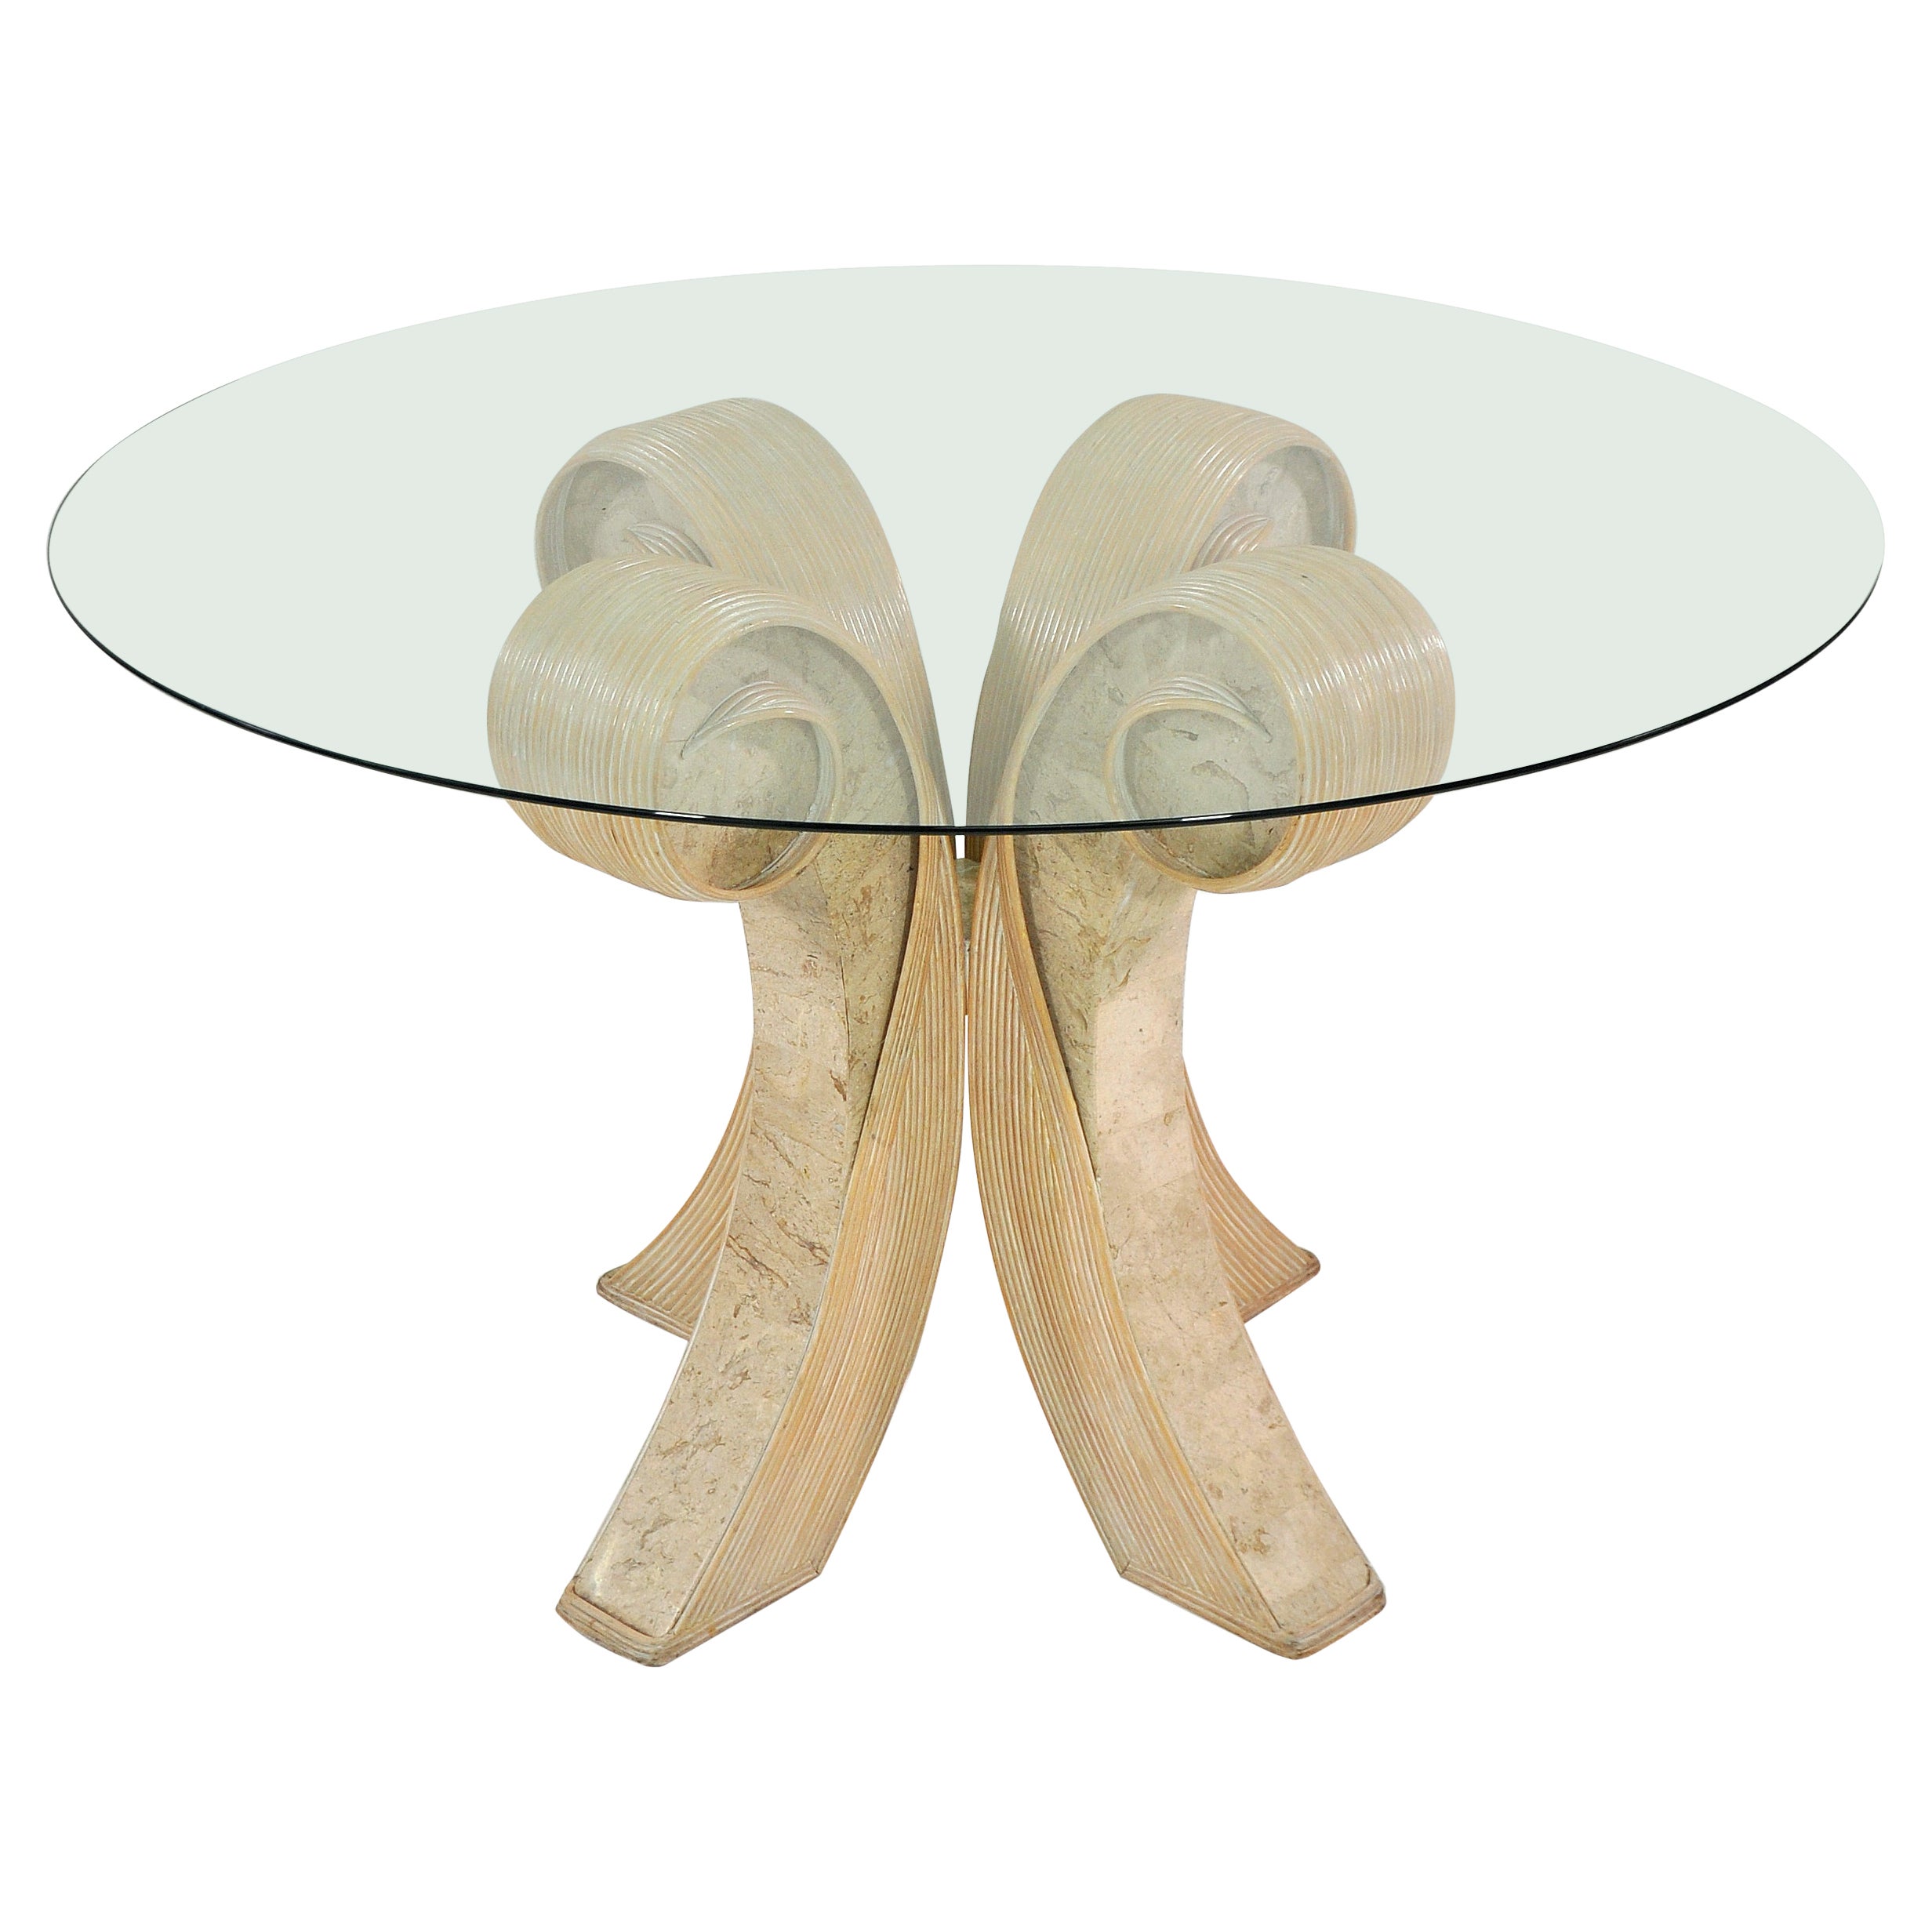 Pencil Reed, Travertine and Glass Dining Table